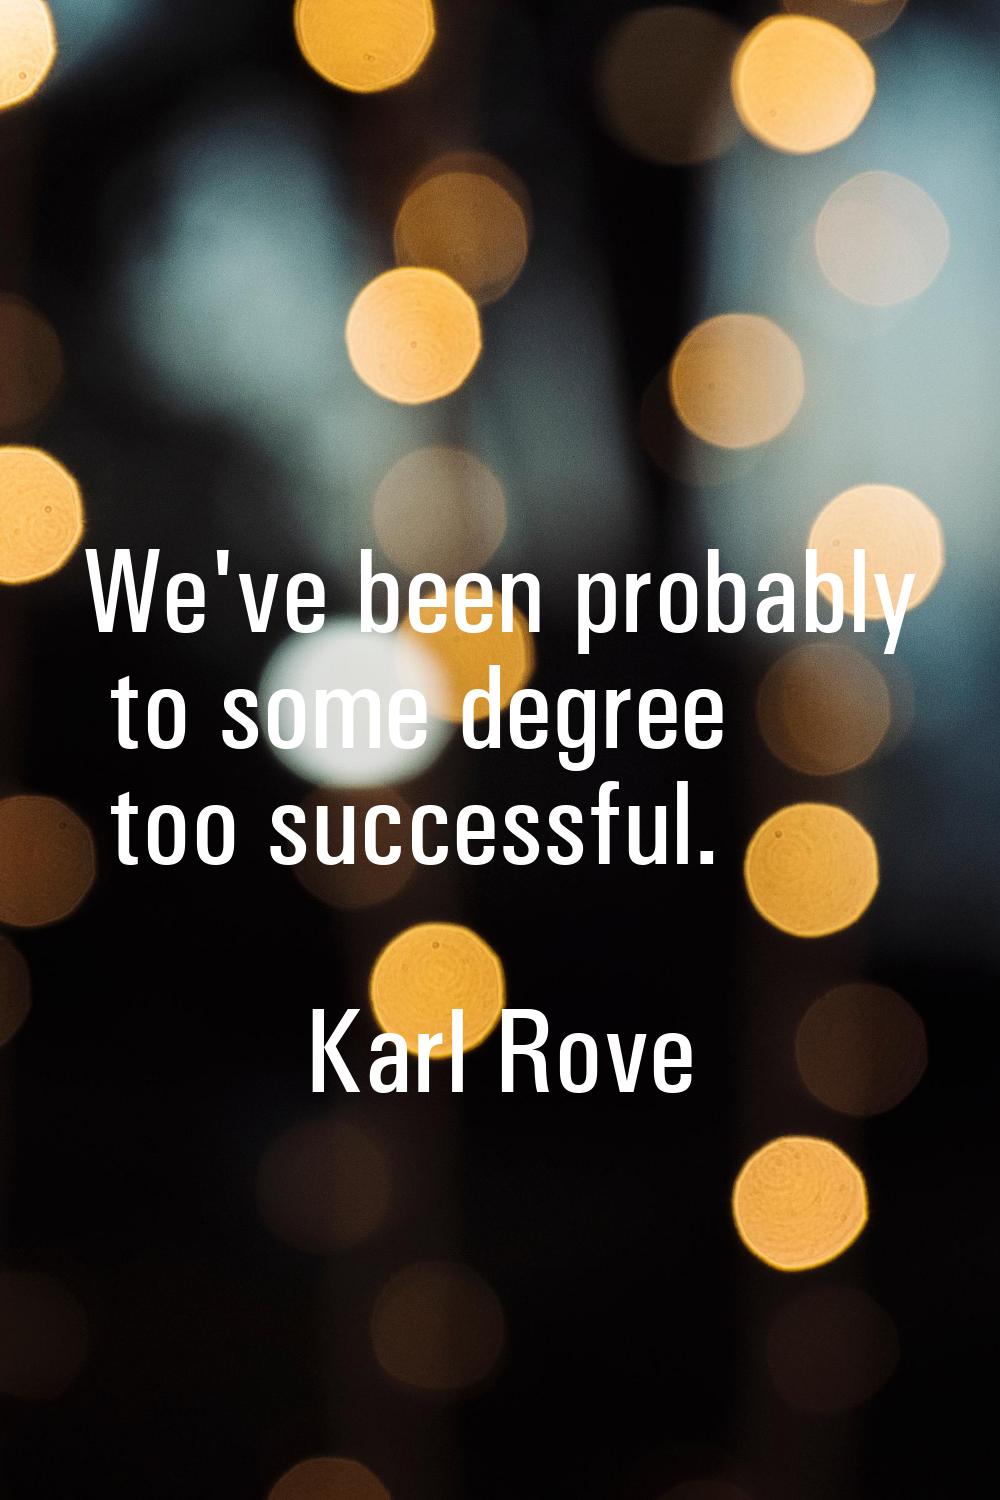 We've been probably to some degree too successful.